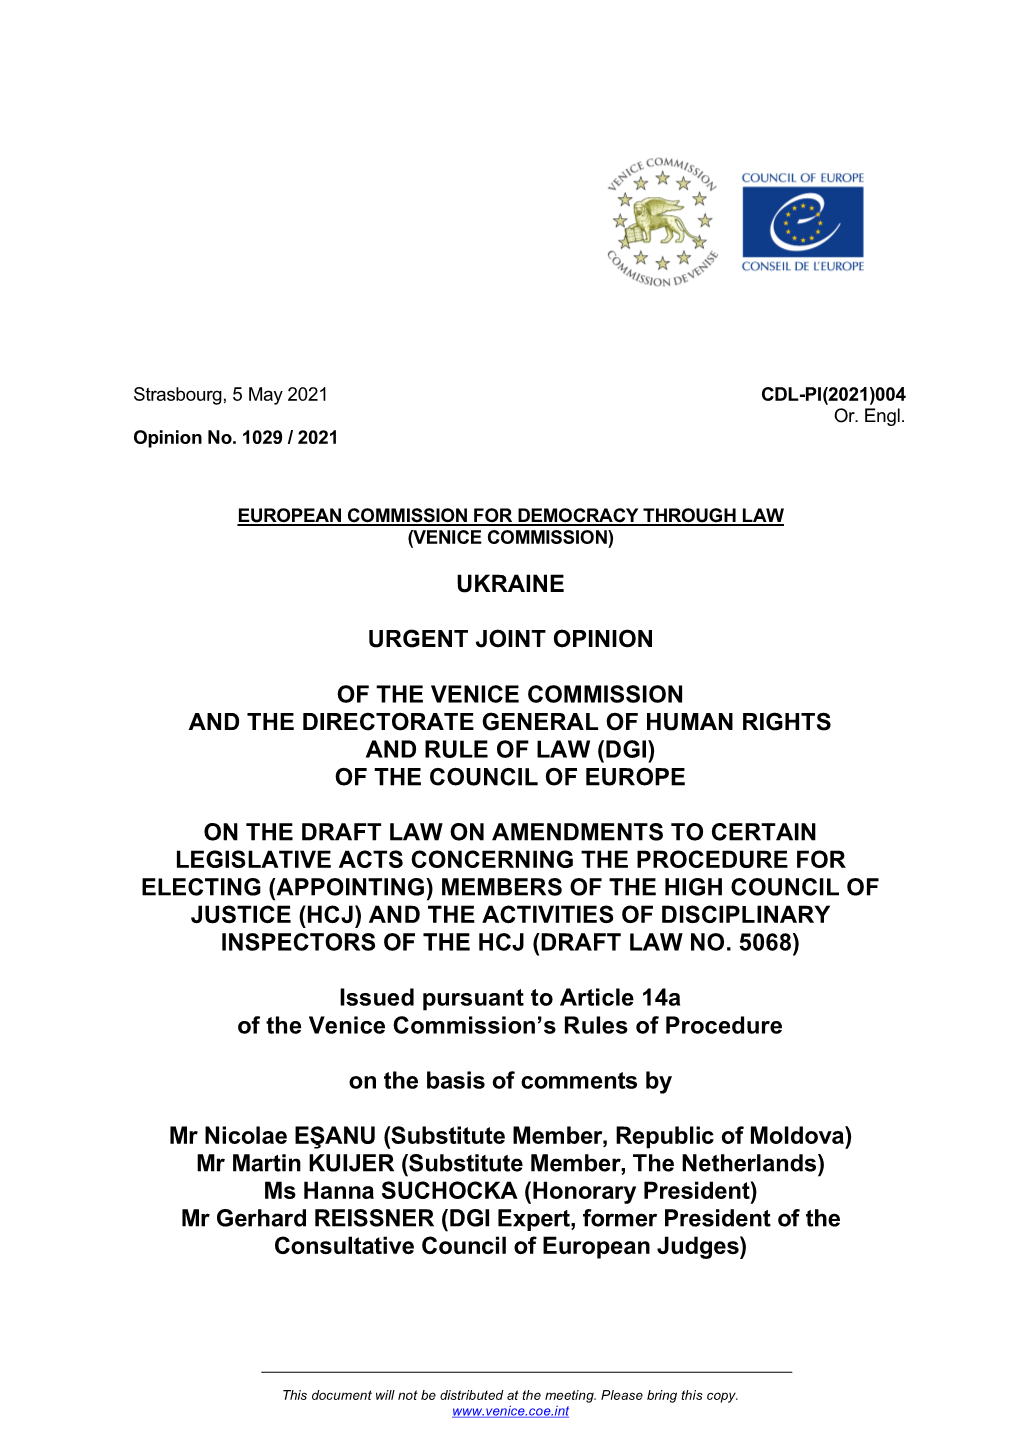 Ukraine Urgent Joint Opinion of the Venice Commission